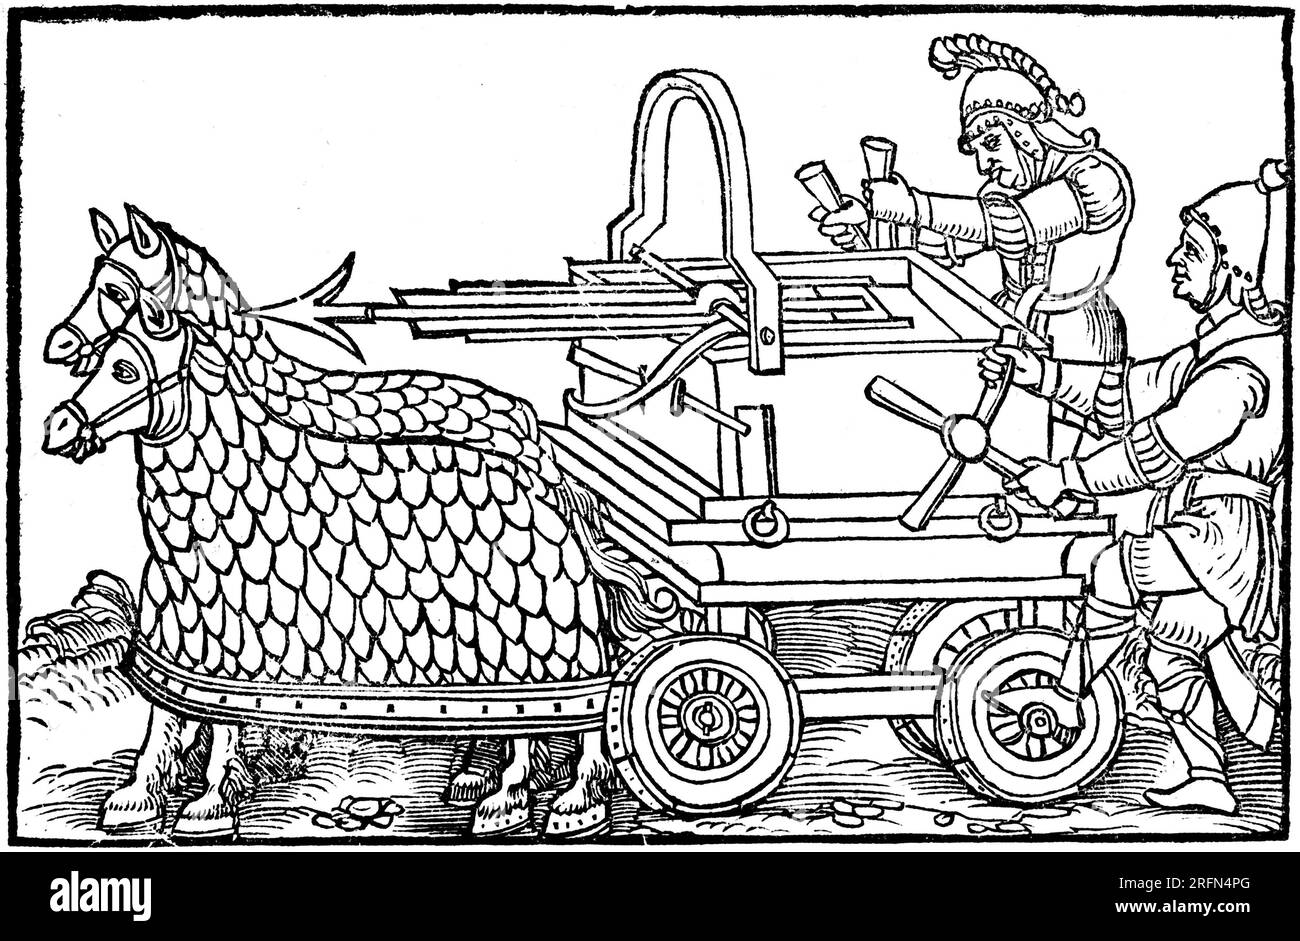 A four-wheeled ballista (carroballista) drawn by armored horses, from an engraving illustrating a 1552 edition of the war-machine catalog De Rebus Bellicis (c. 400). The device, mounted on a wagon, is manipulated like a crossbow, shooting large arrows at enemy fortifications. Stock Photo